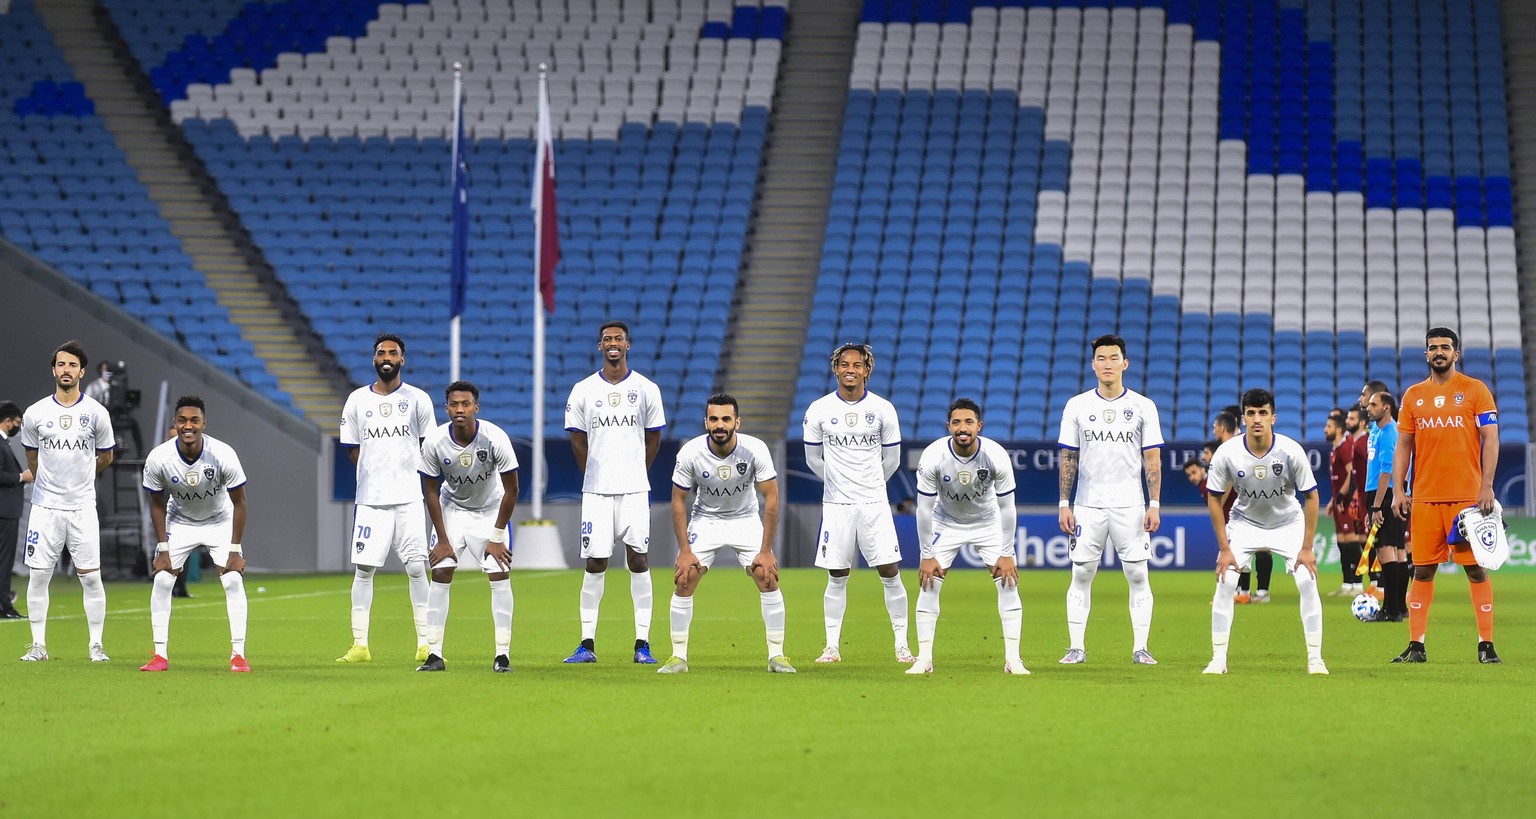 200921 -- DOHA, Sept. 21, 2020 -- Al Hilal s starting players pose for a team photo prior to the AFC Asian Champions League group B football match between Al Hilal SFC of Saudi Arabia and Shahr Khodro ...